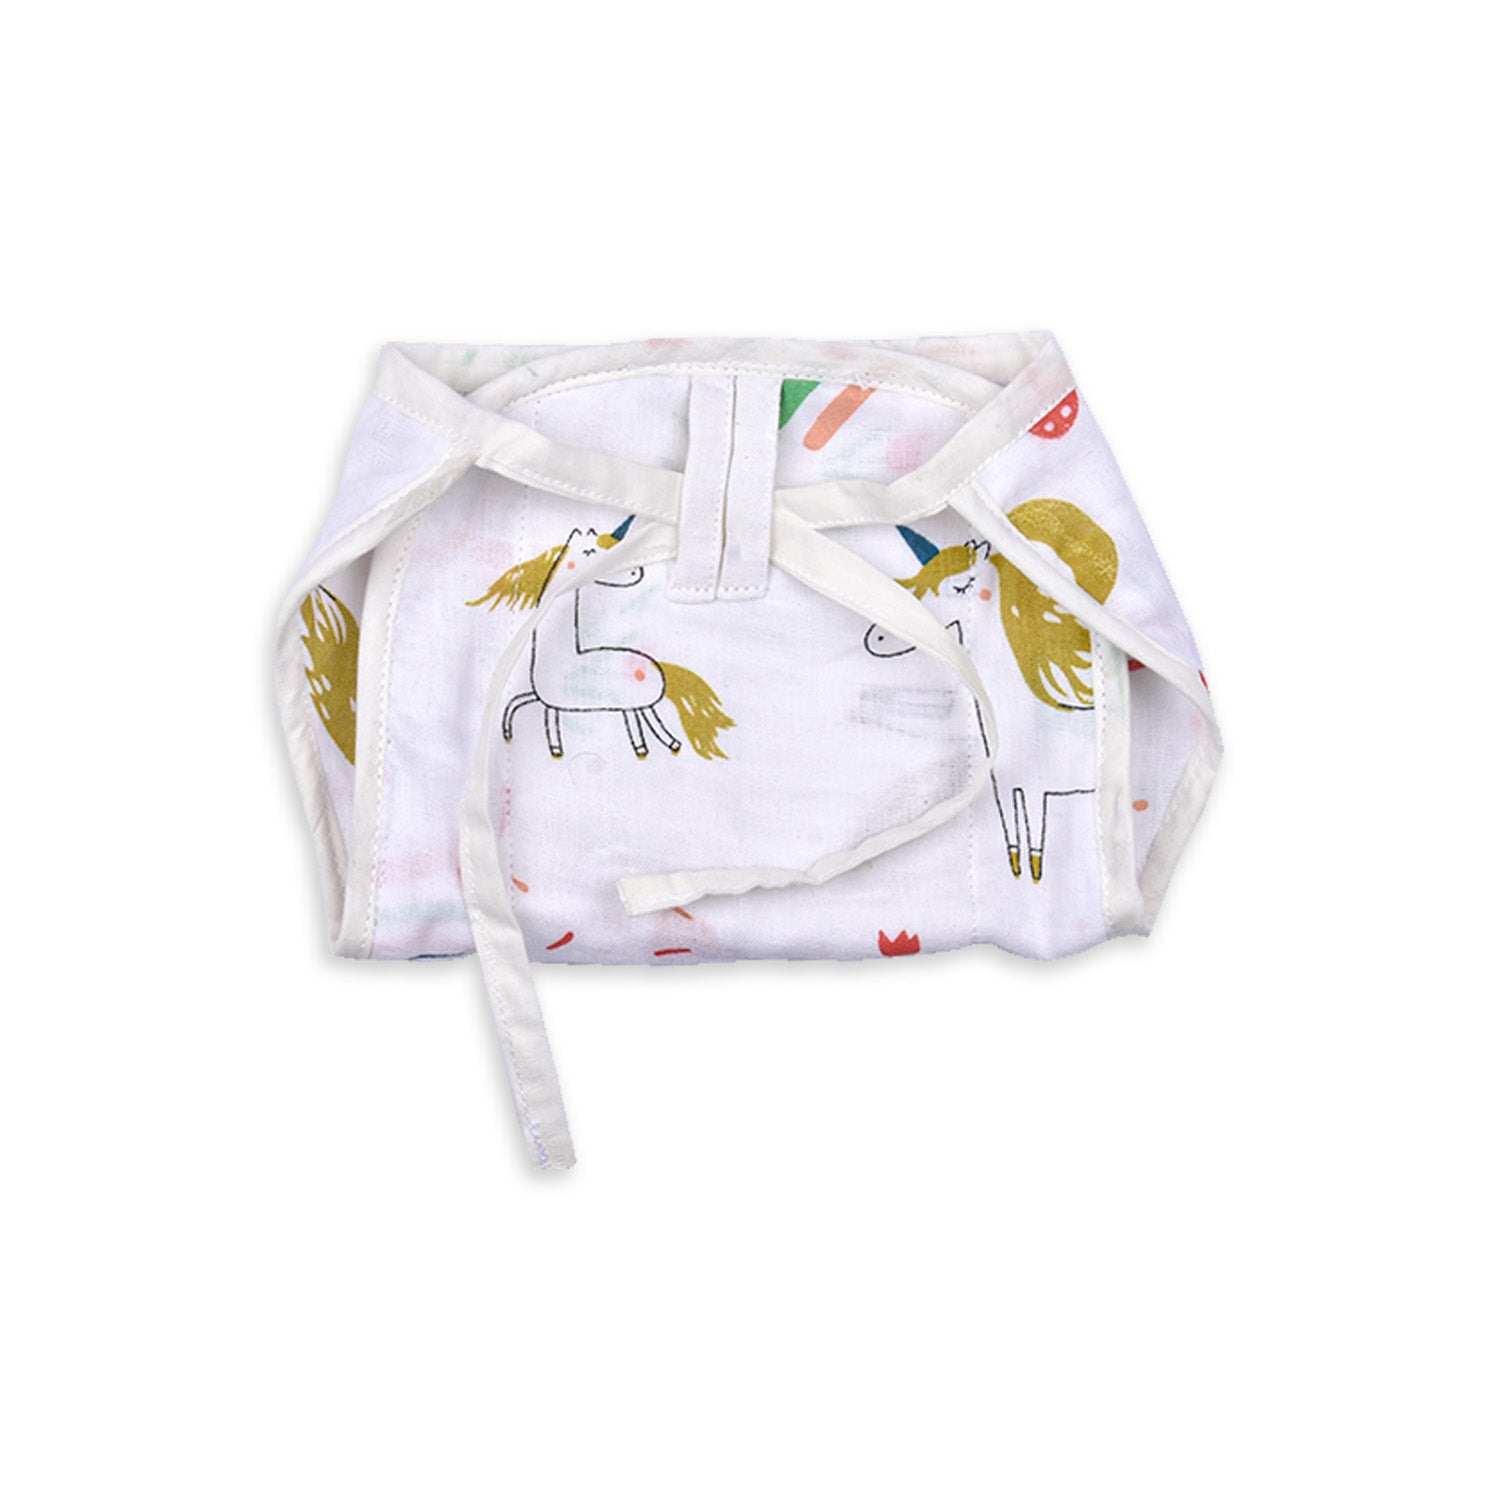 Baby Organic Cotton Printed Muslin Nappies Pack of - 3 Mix